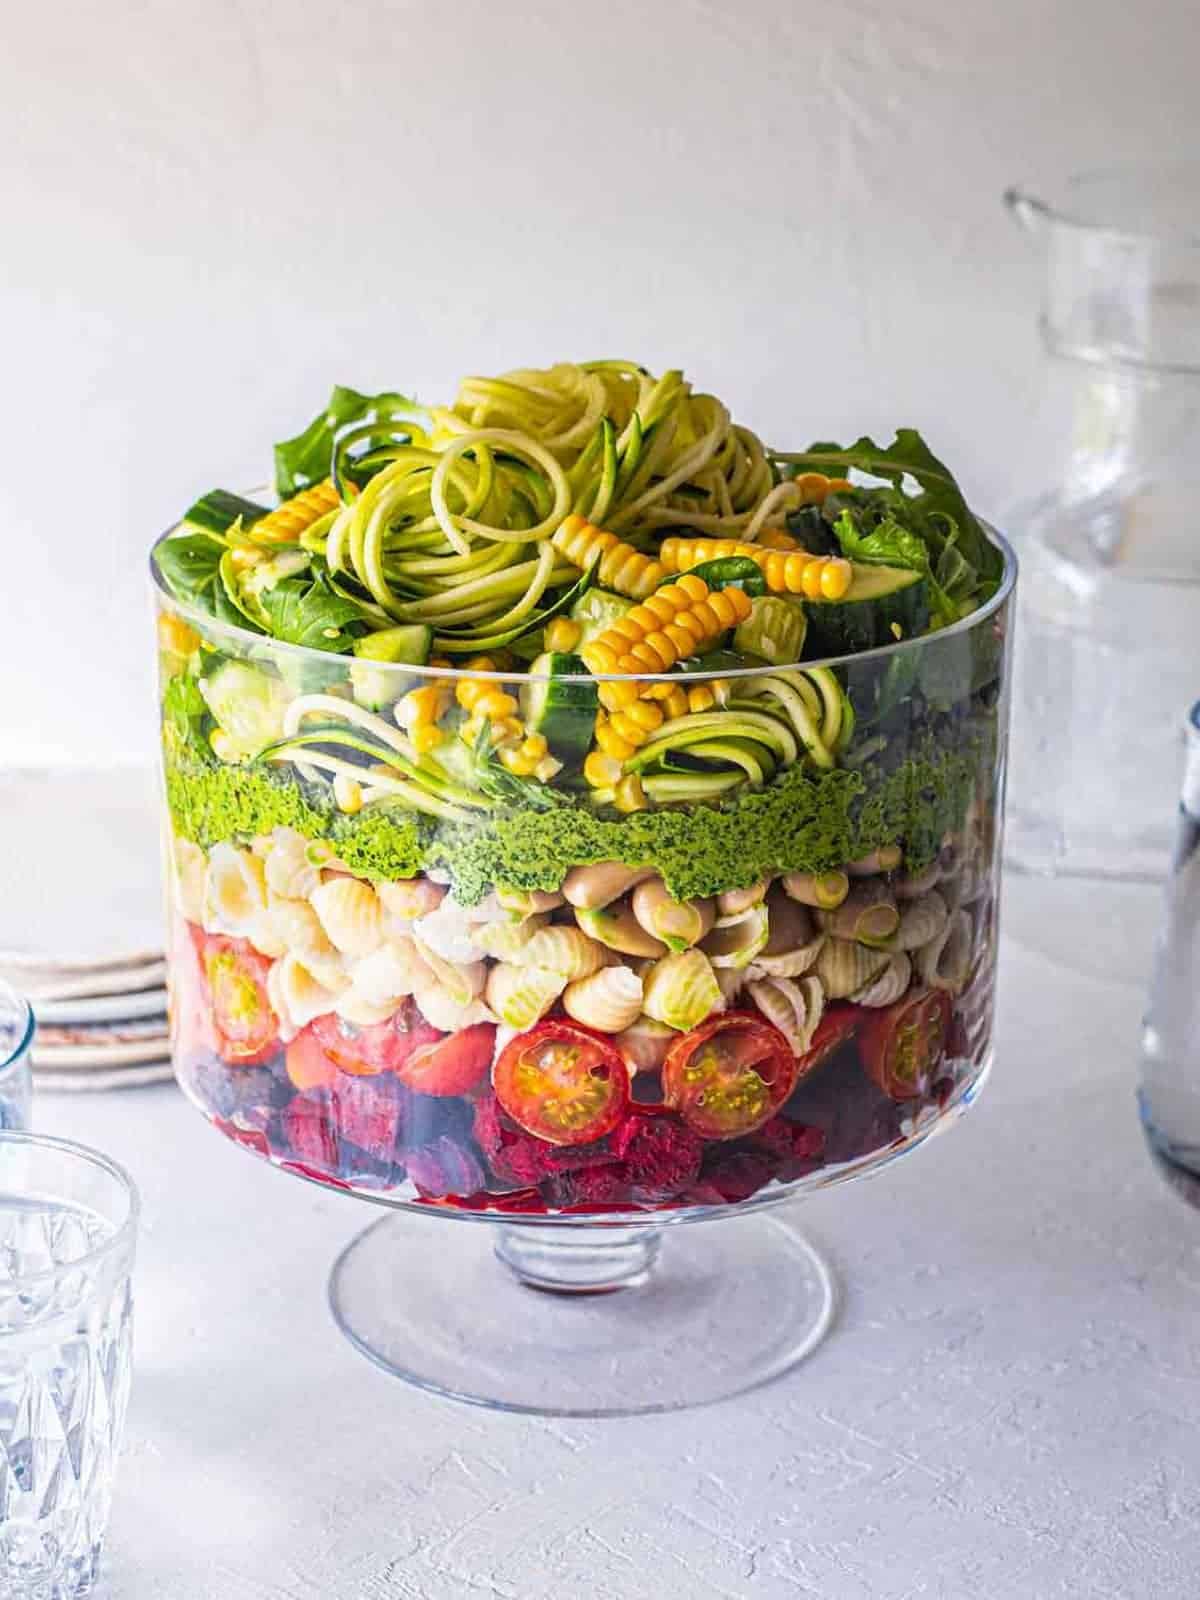 Christmas layered trifle pasta salad in a trifle bowl